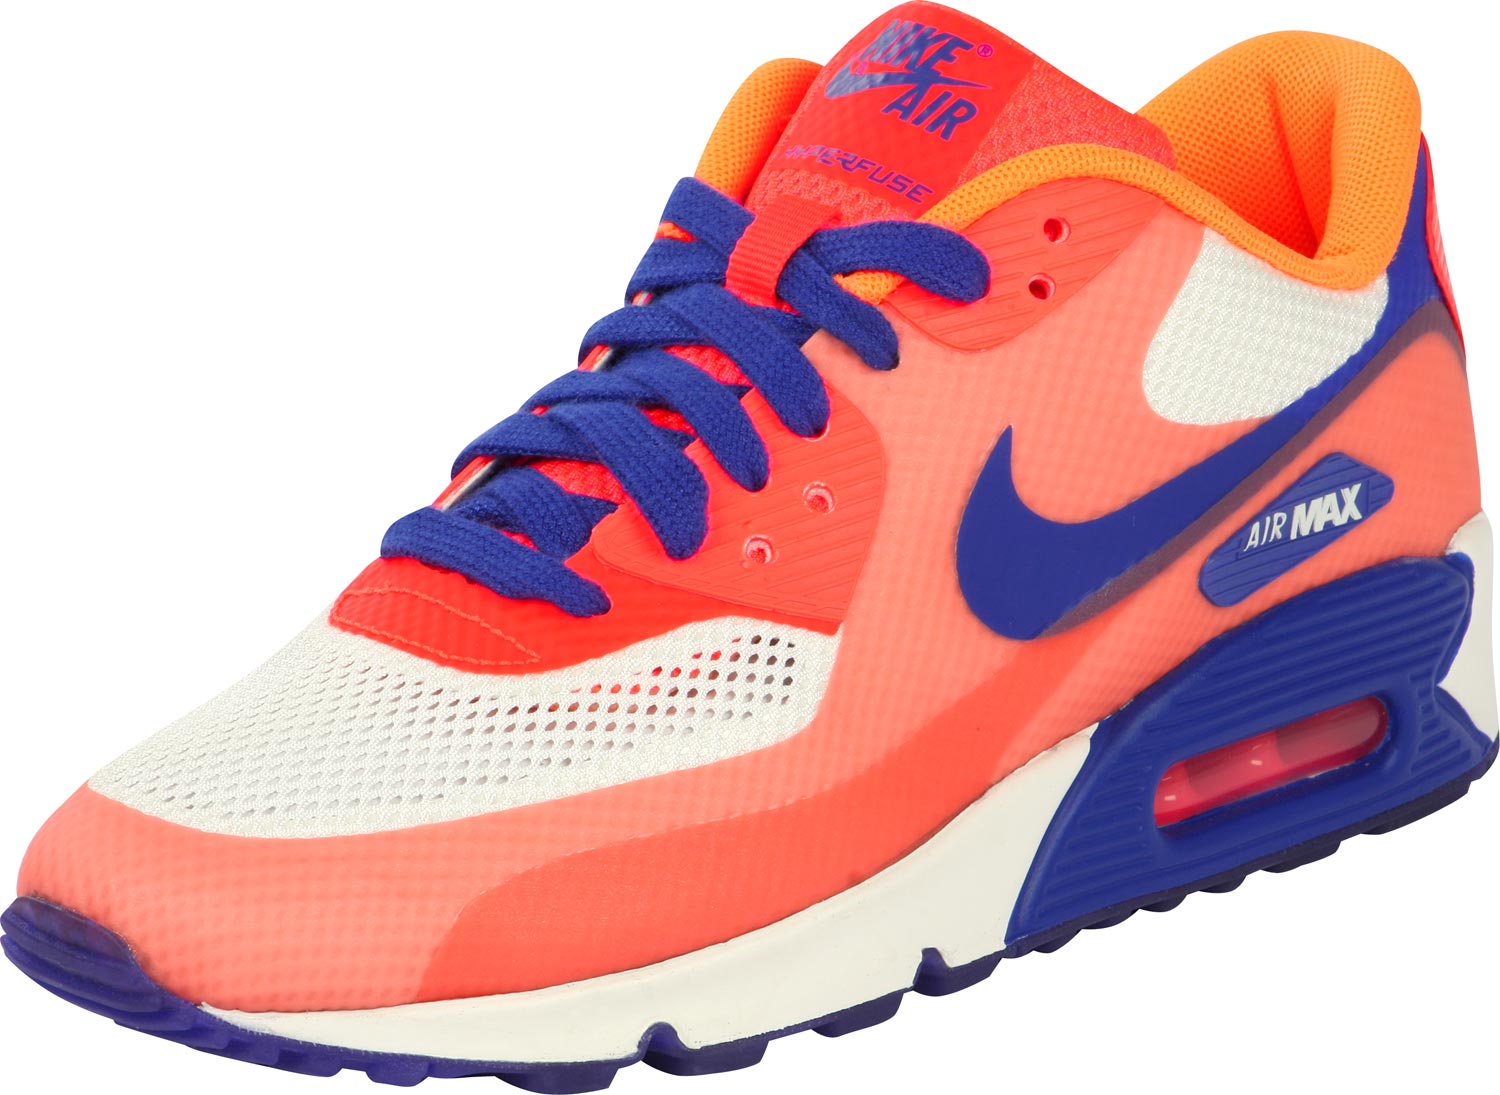 nike air max 90 hyperfuse premium w chaussures, nike air max 90 hyperfuse premium w schuhe blue citrus 1510 zoom 0